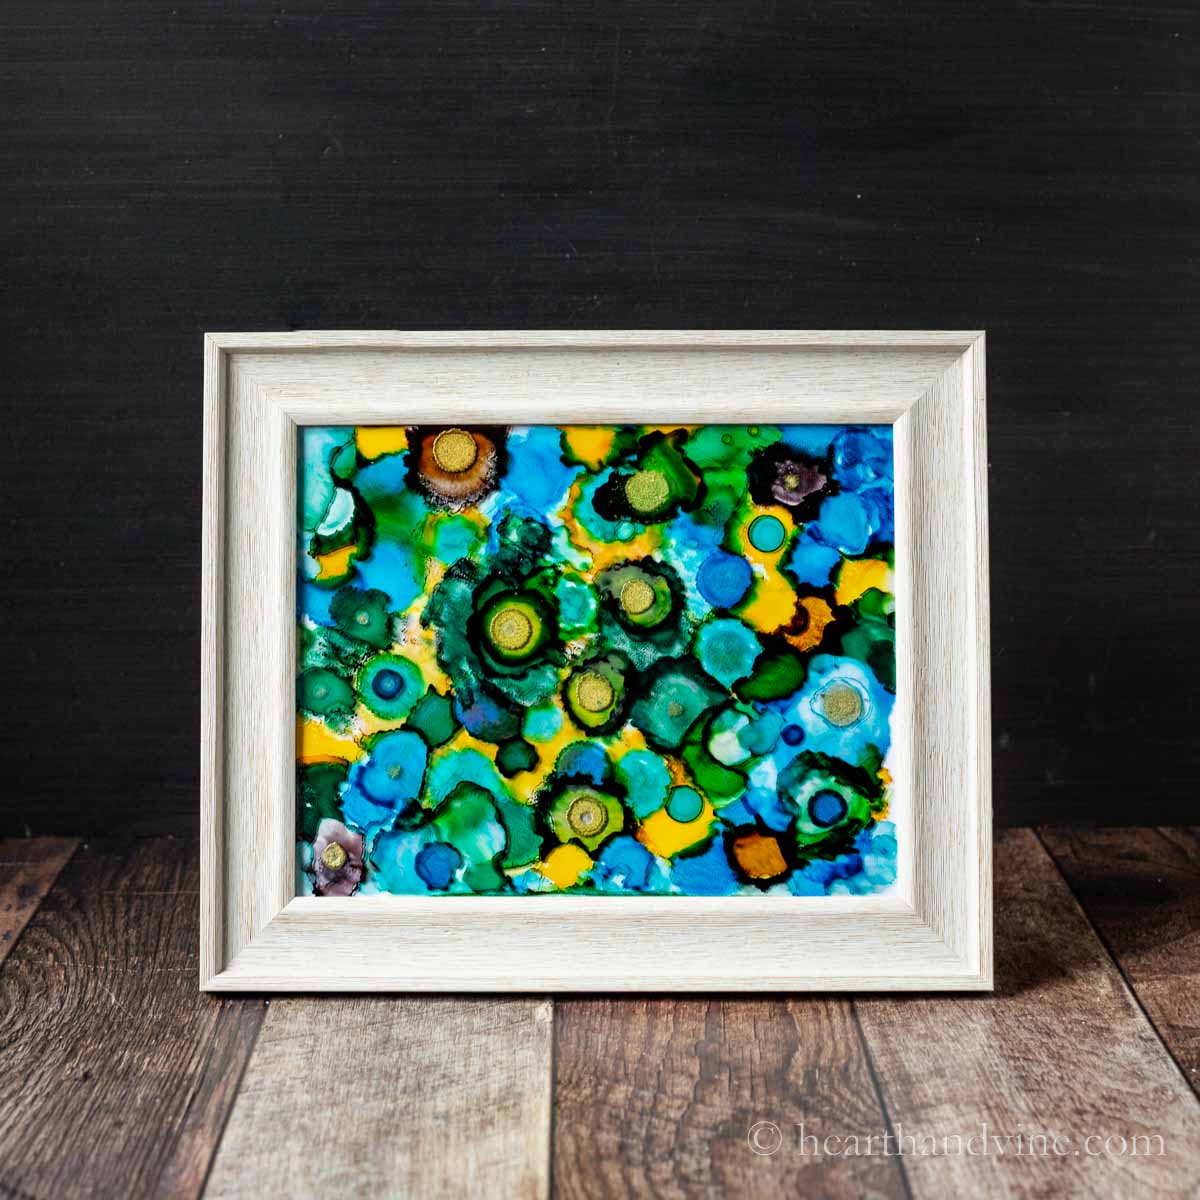 Alcohol ink in glass painting in a frame on a table.